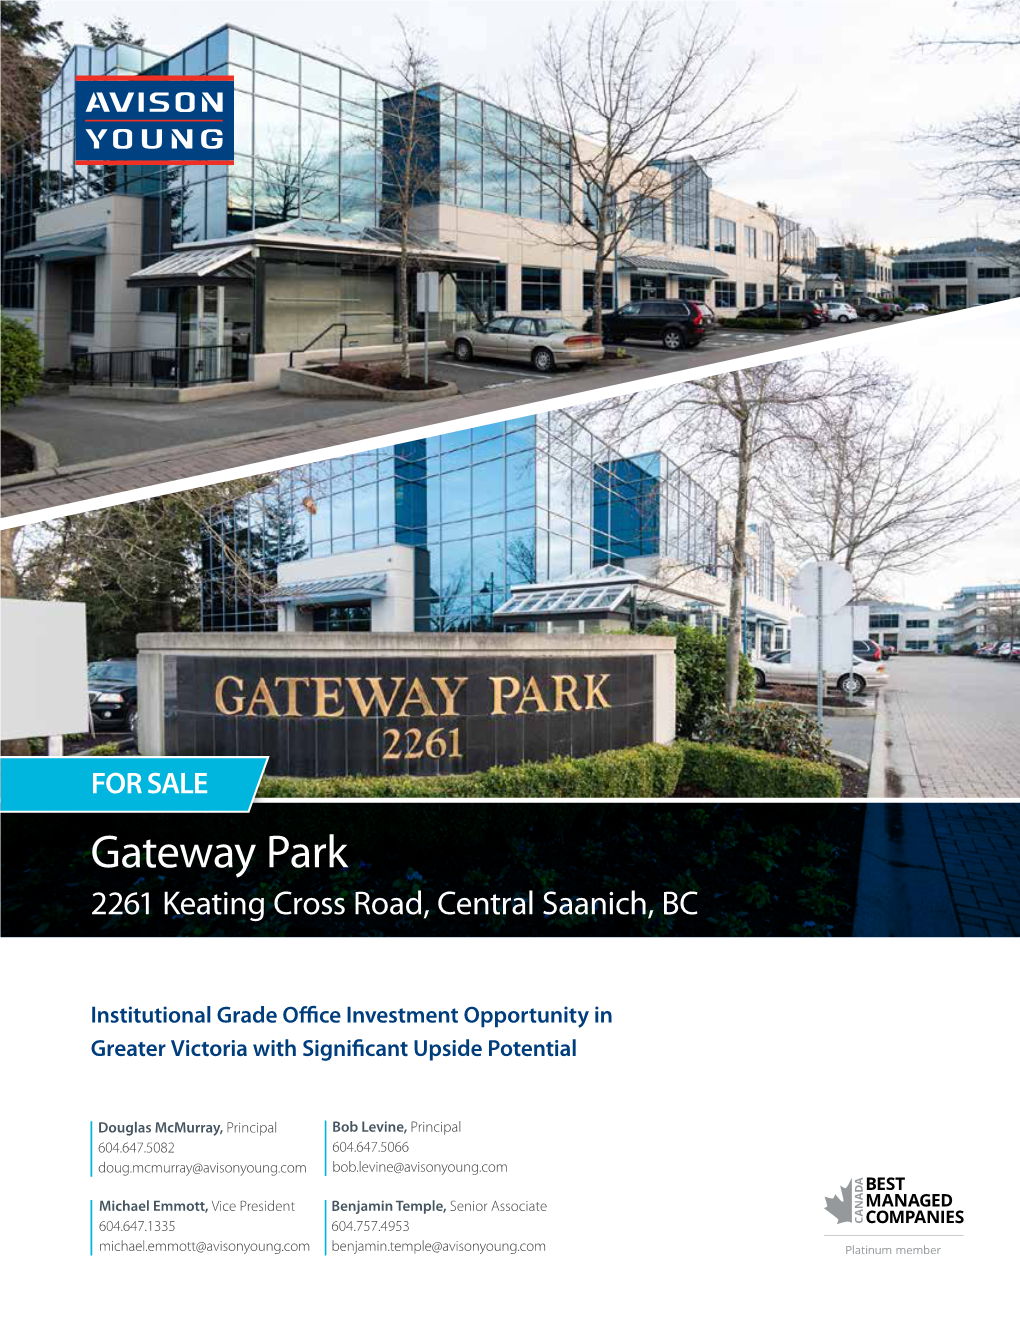 Gateway Park 2261 Keating Cross Road, Central Saanich, BC